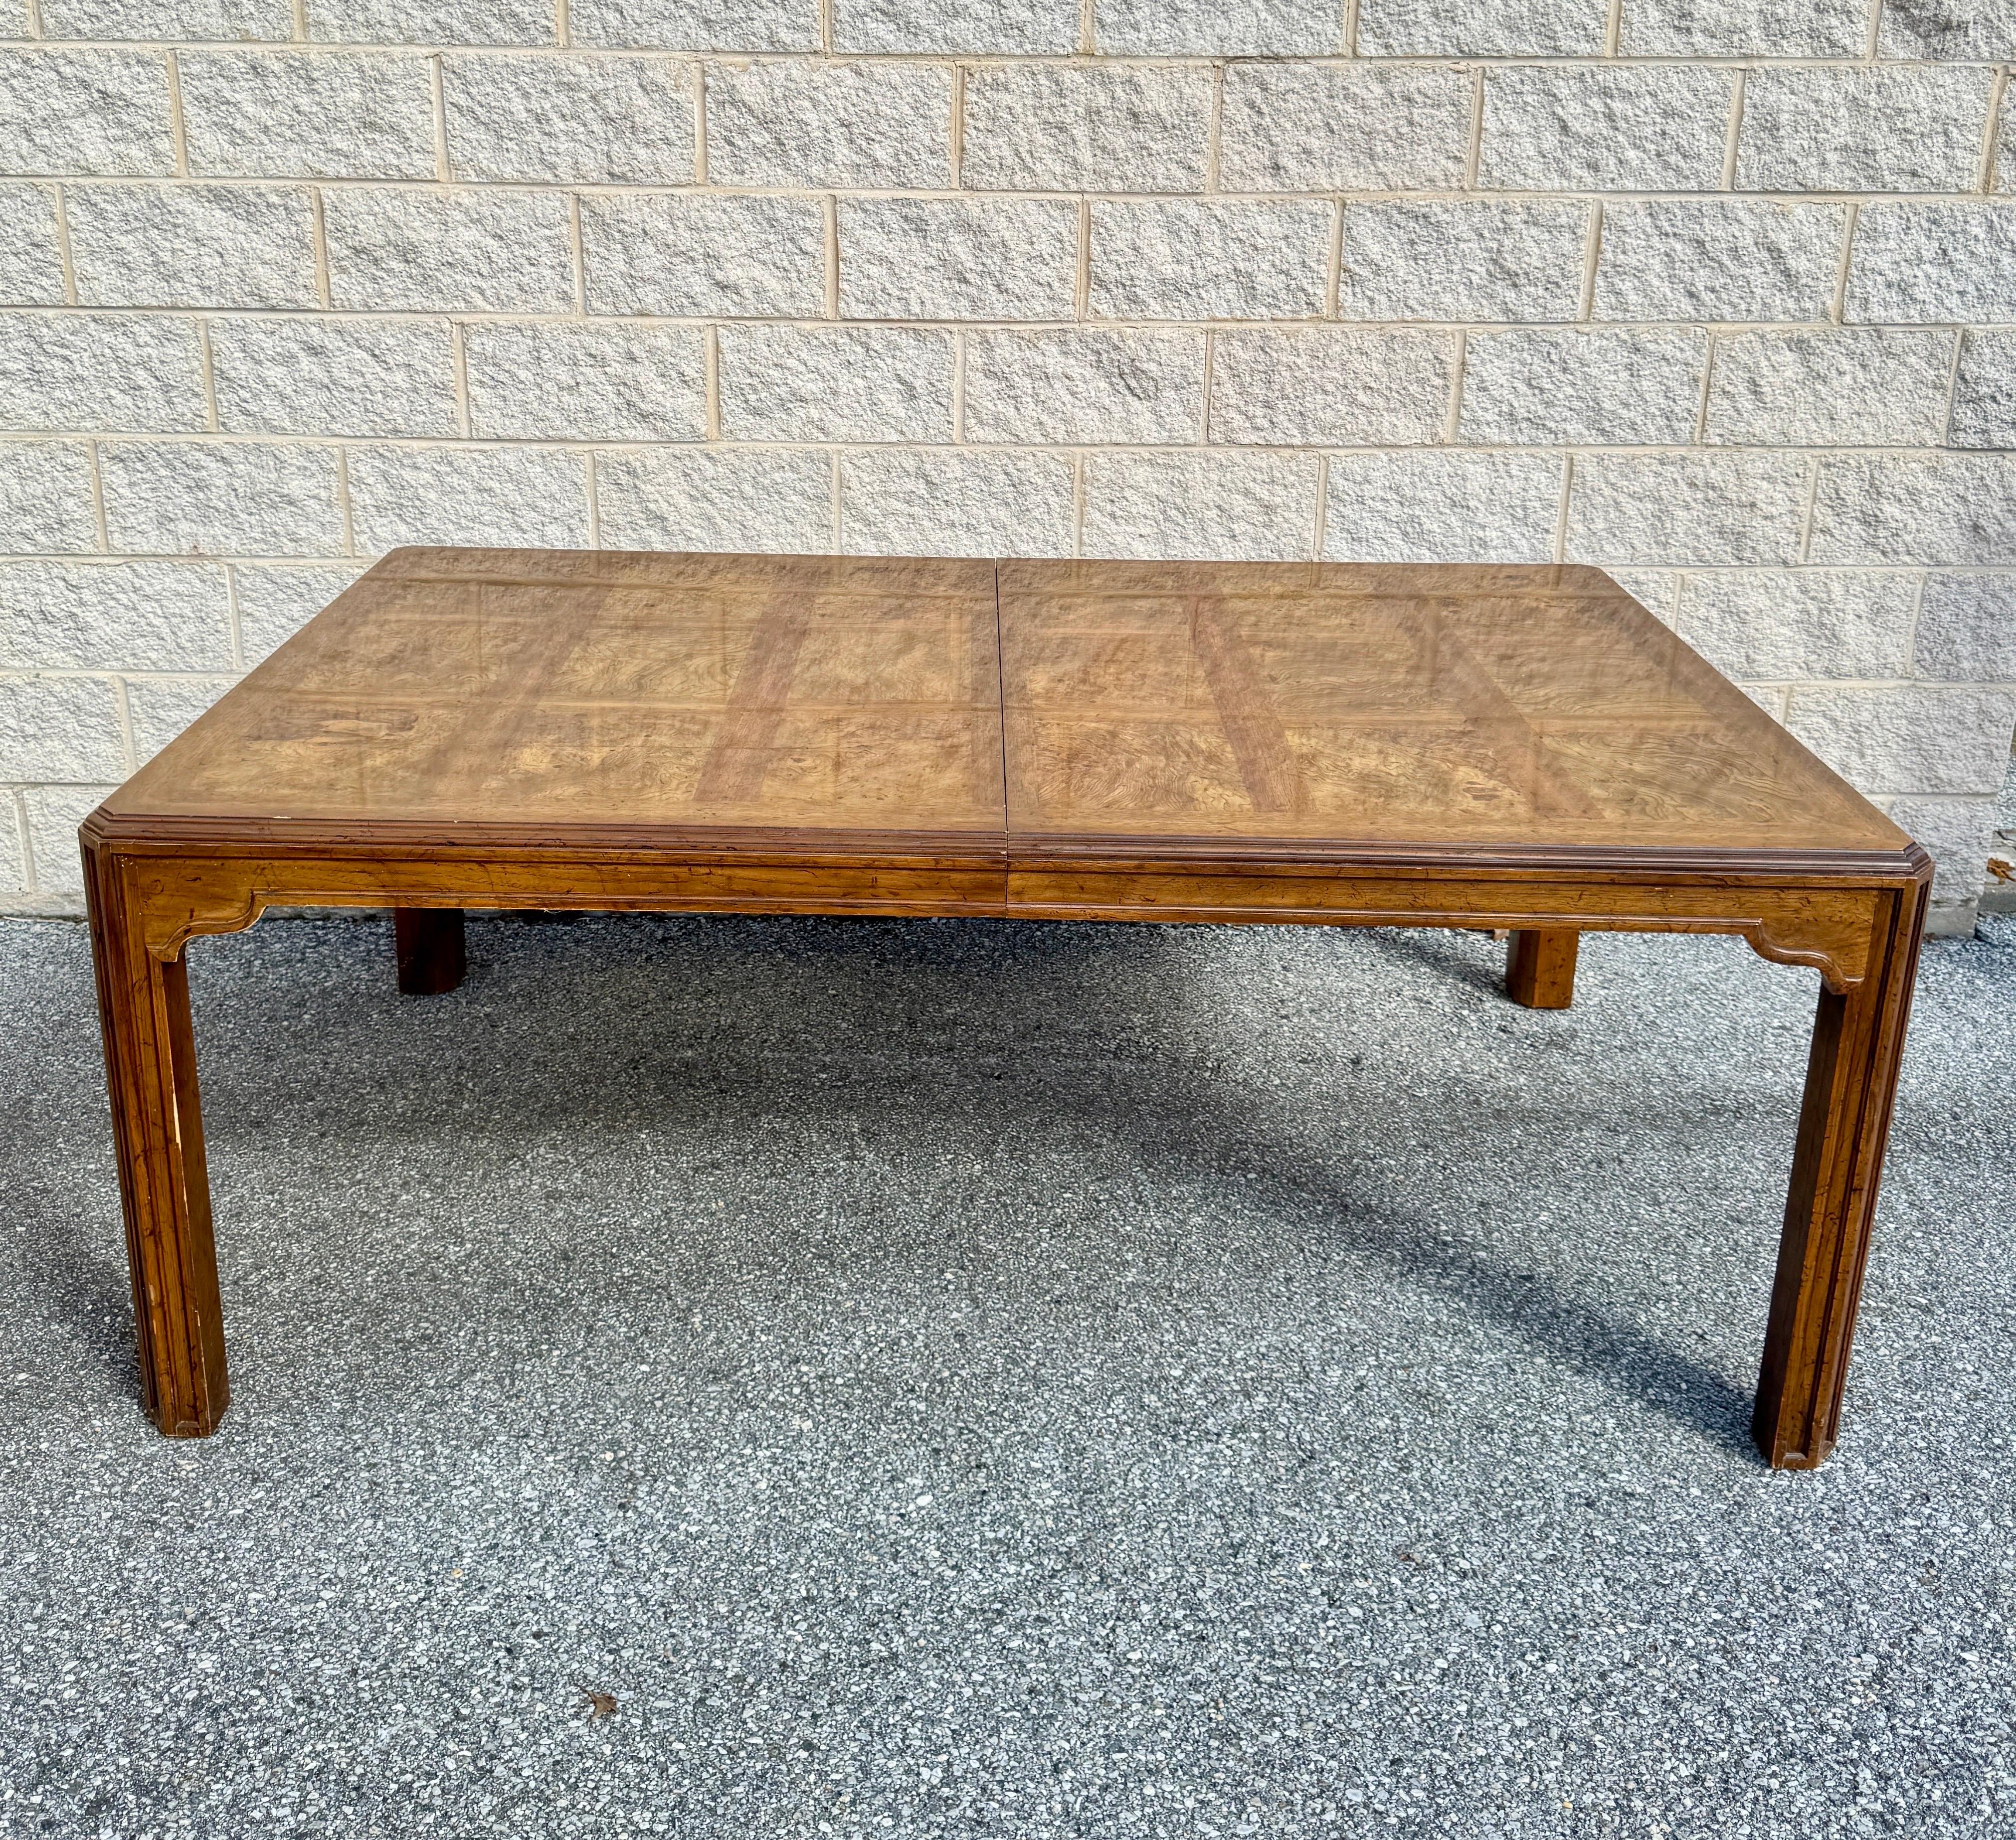 Gorgeous high quality burl wood dining table by Drexel, comes with three extension leaves.
Each leaf is 22